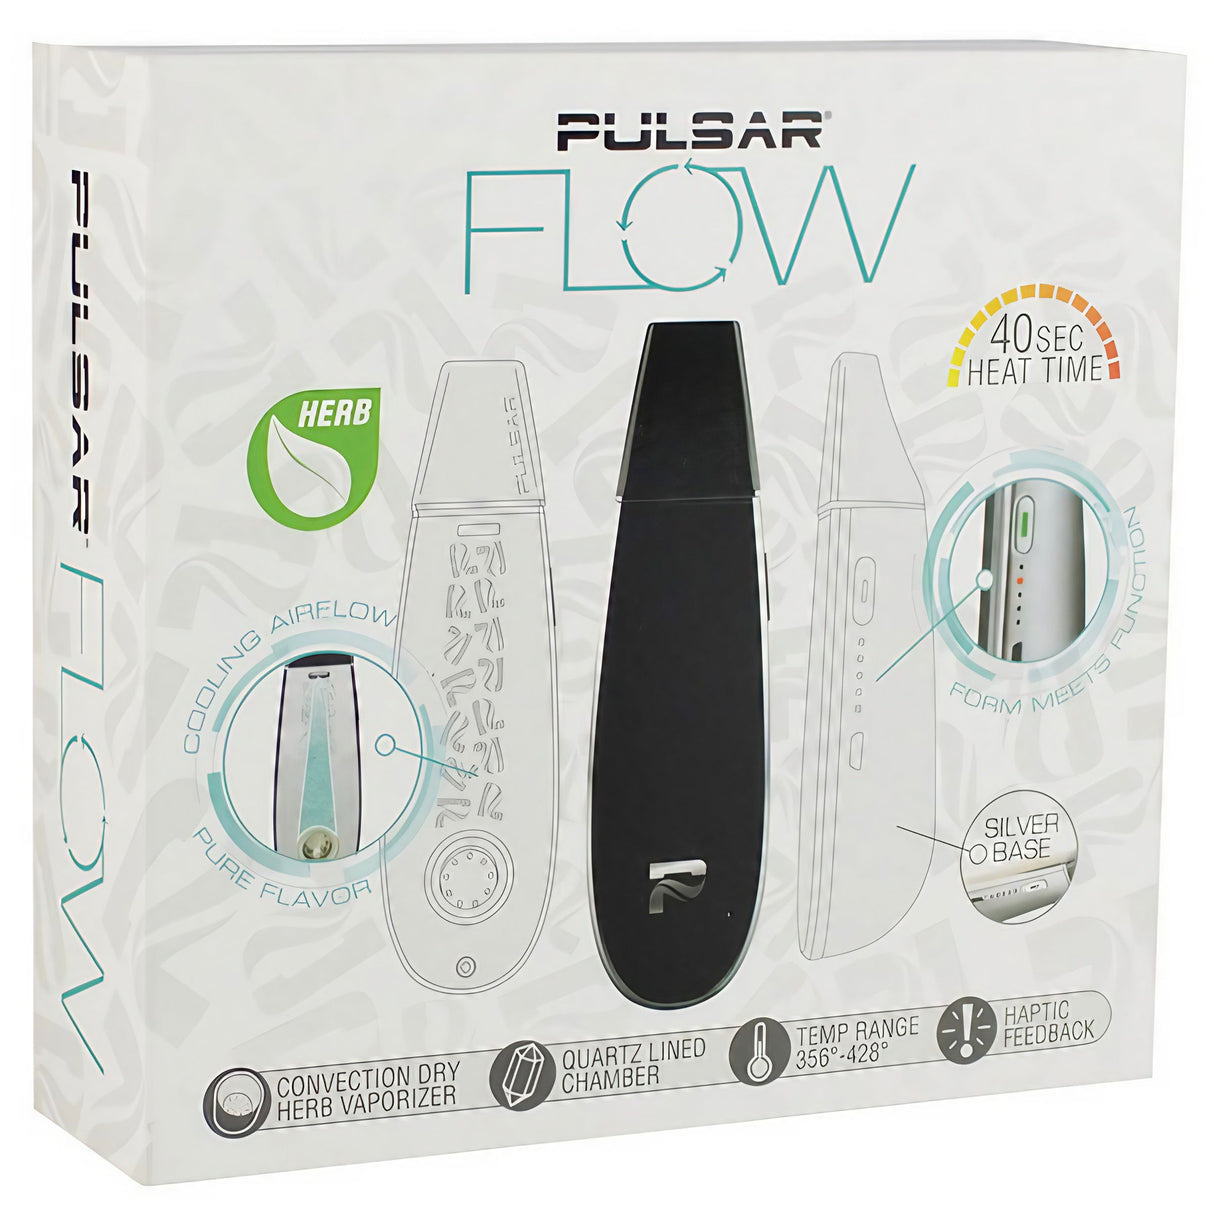 Pulsar Flow Vaporizer packaging with product features and black design front view